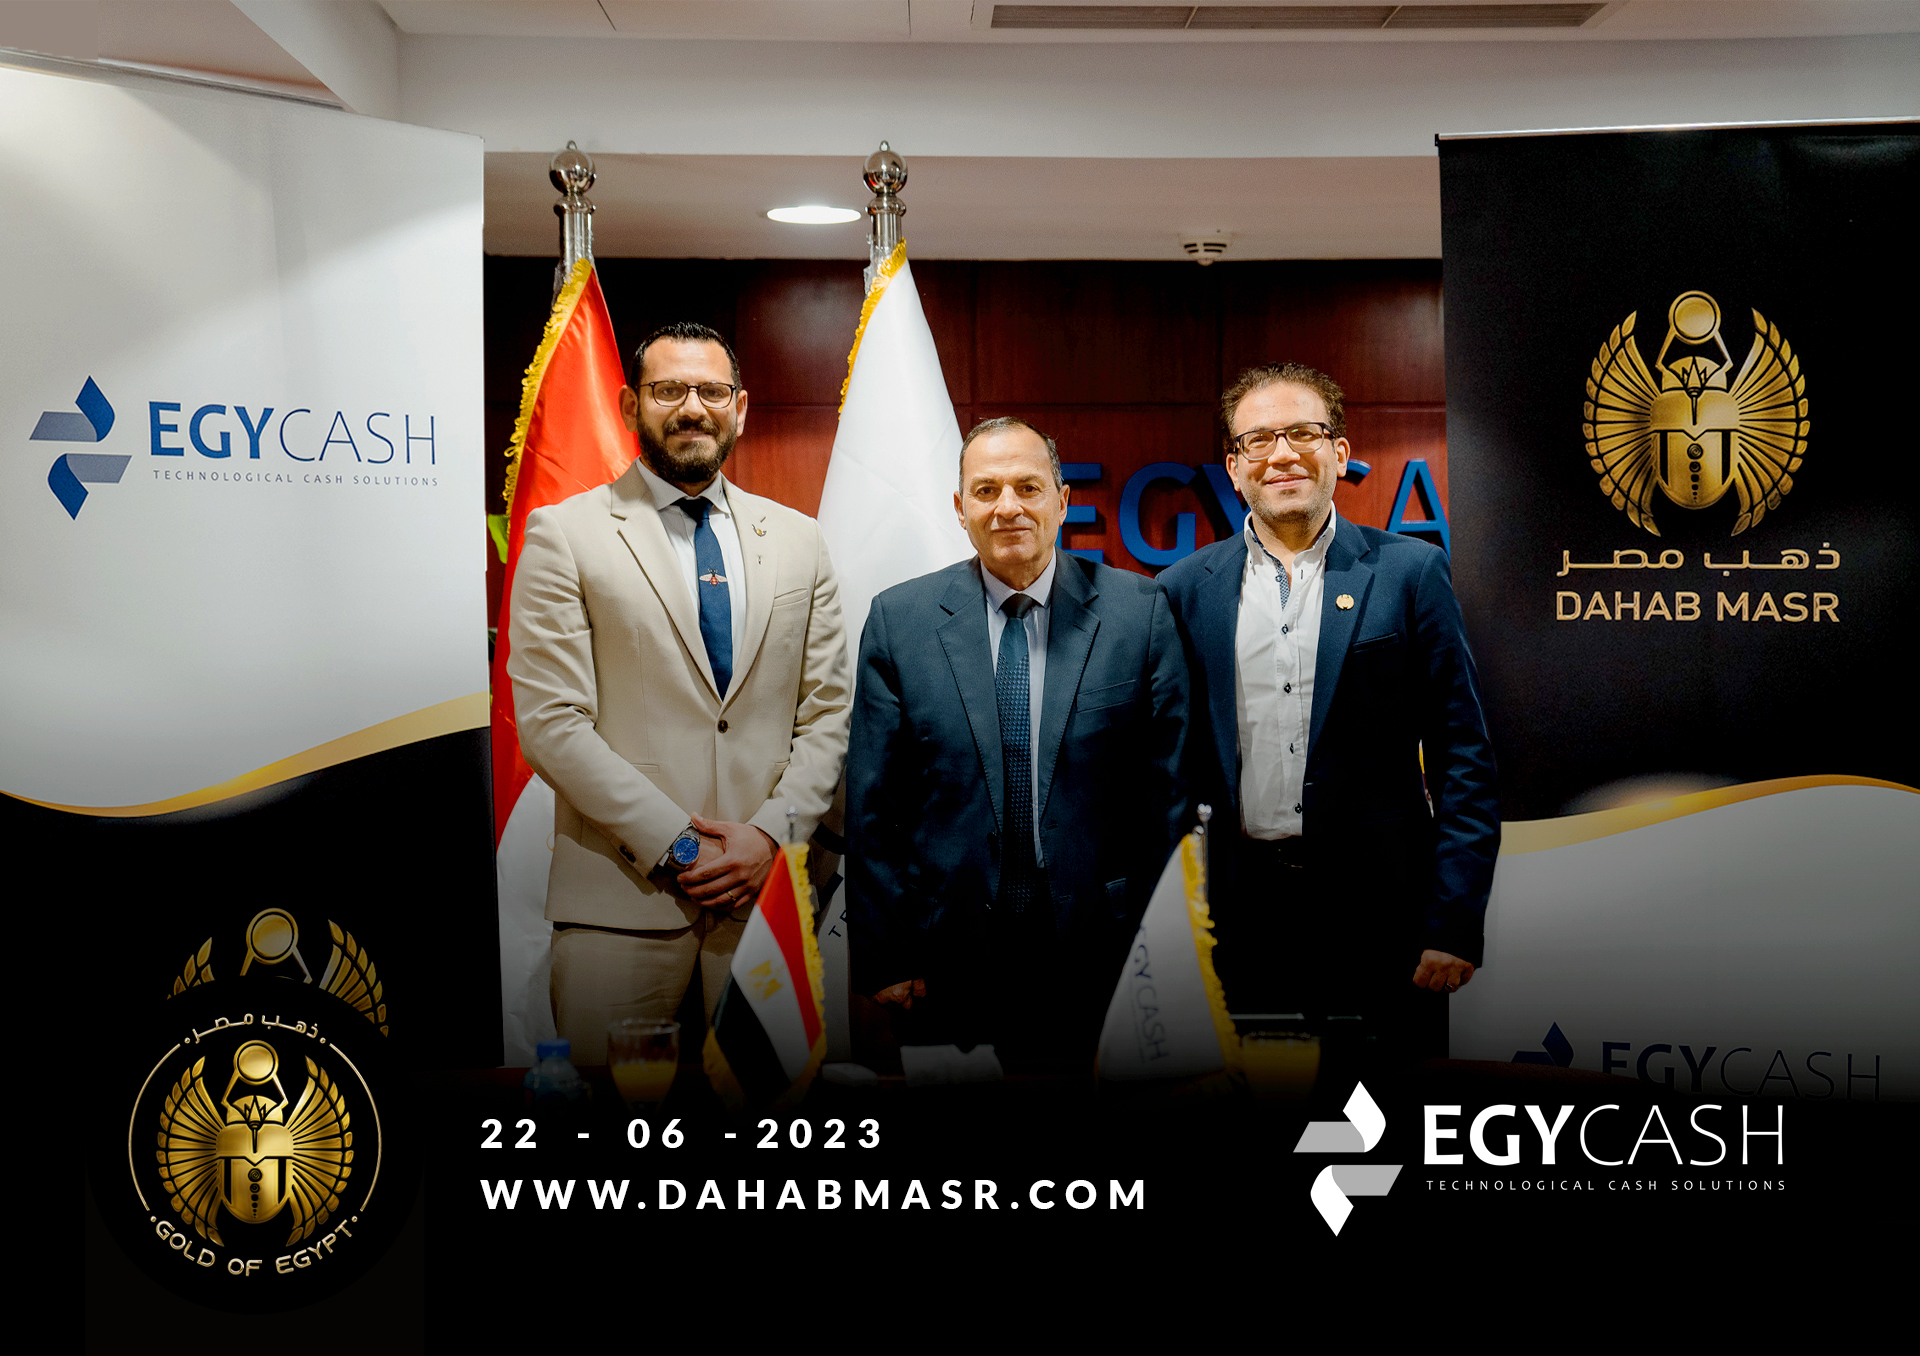 Strategic Partnership between “Dahab Masr” and “EgyCash” to Develop the Precious Metals Market, Providing Efficient Mechanisms for safeguard Gold and Silver.